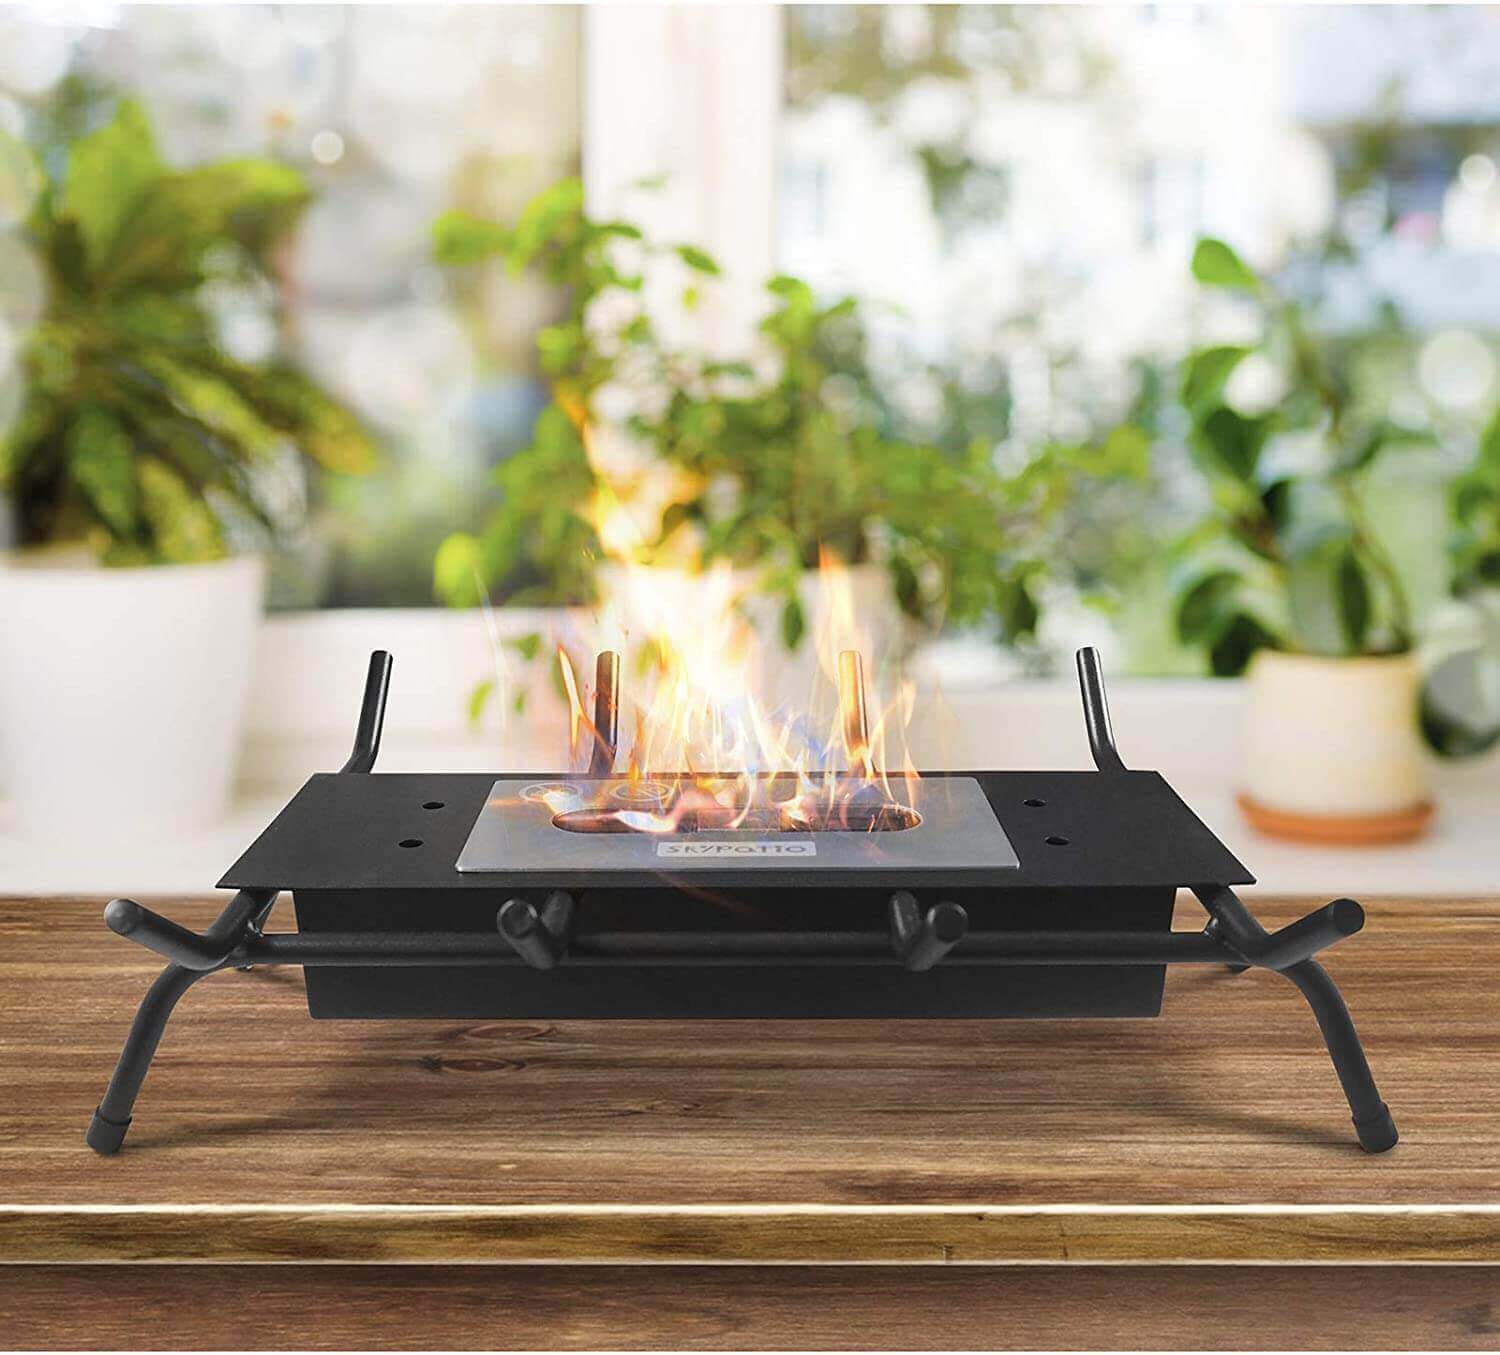 Top Fireplace with Grates / Ventless Indoor Outdoor Fire Pit Tabletop Portable Fire Bowl Pot Fireplace in Black